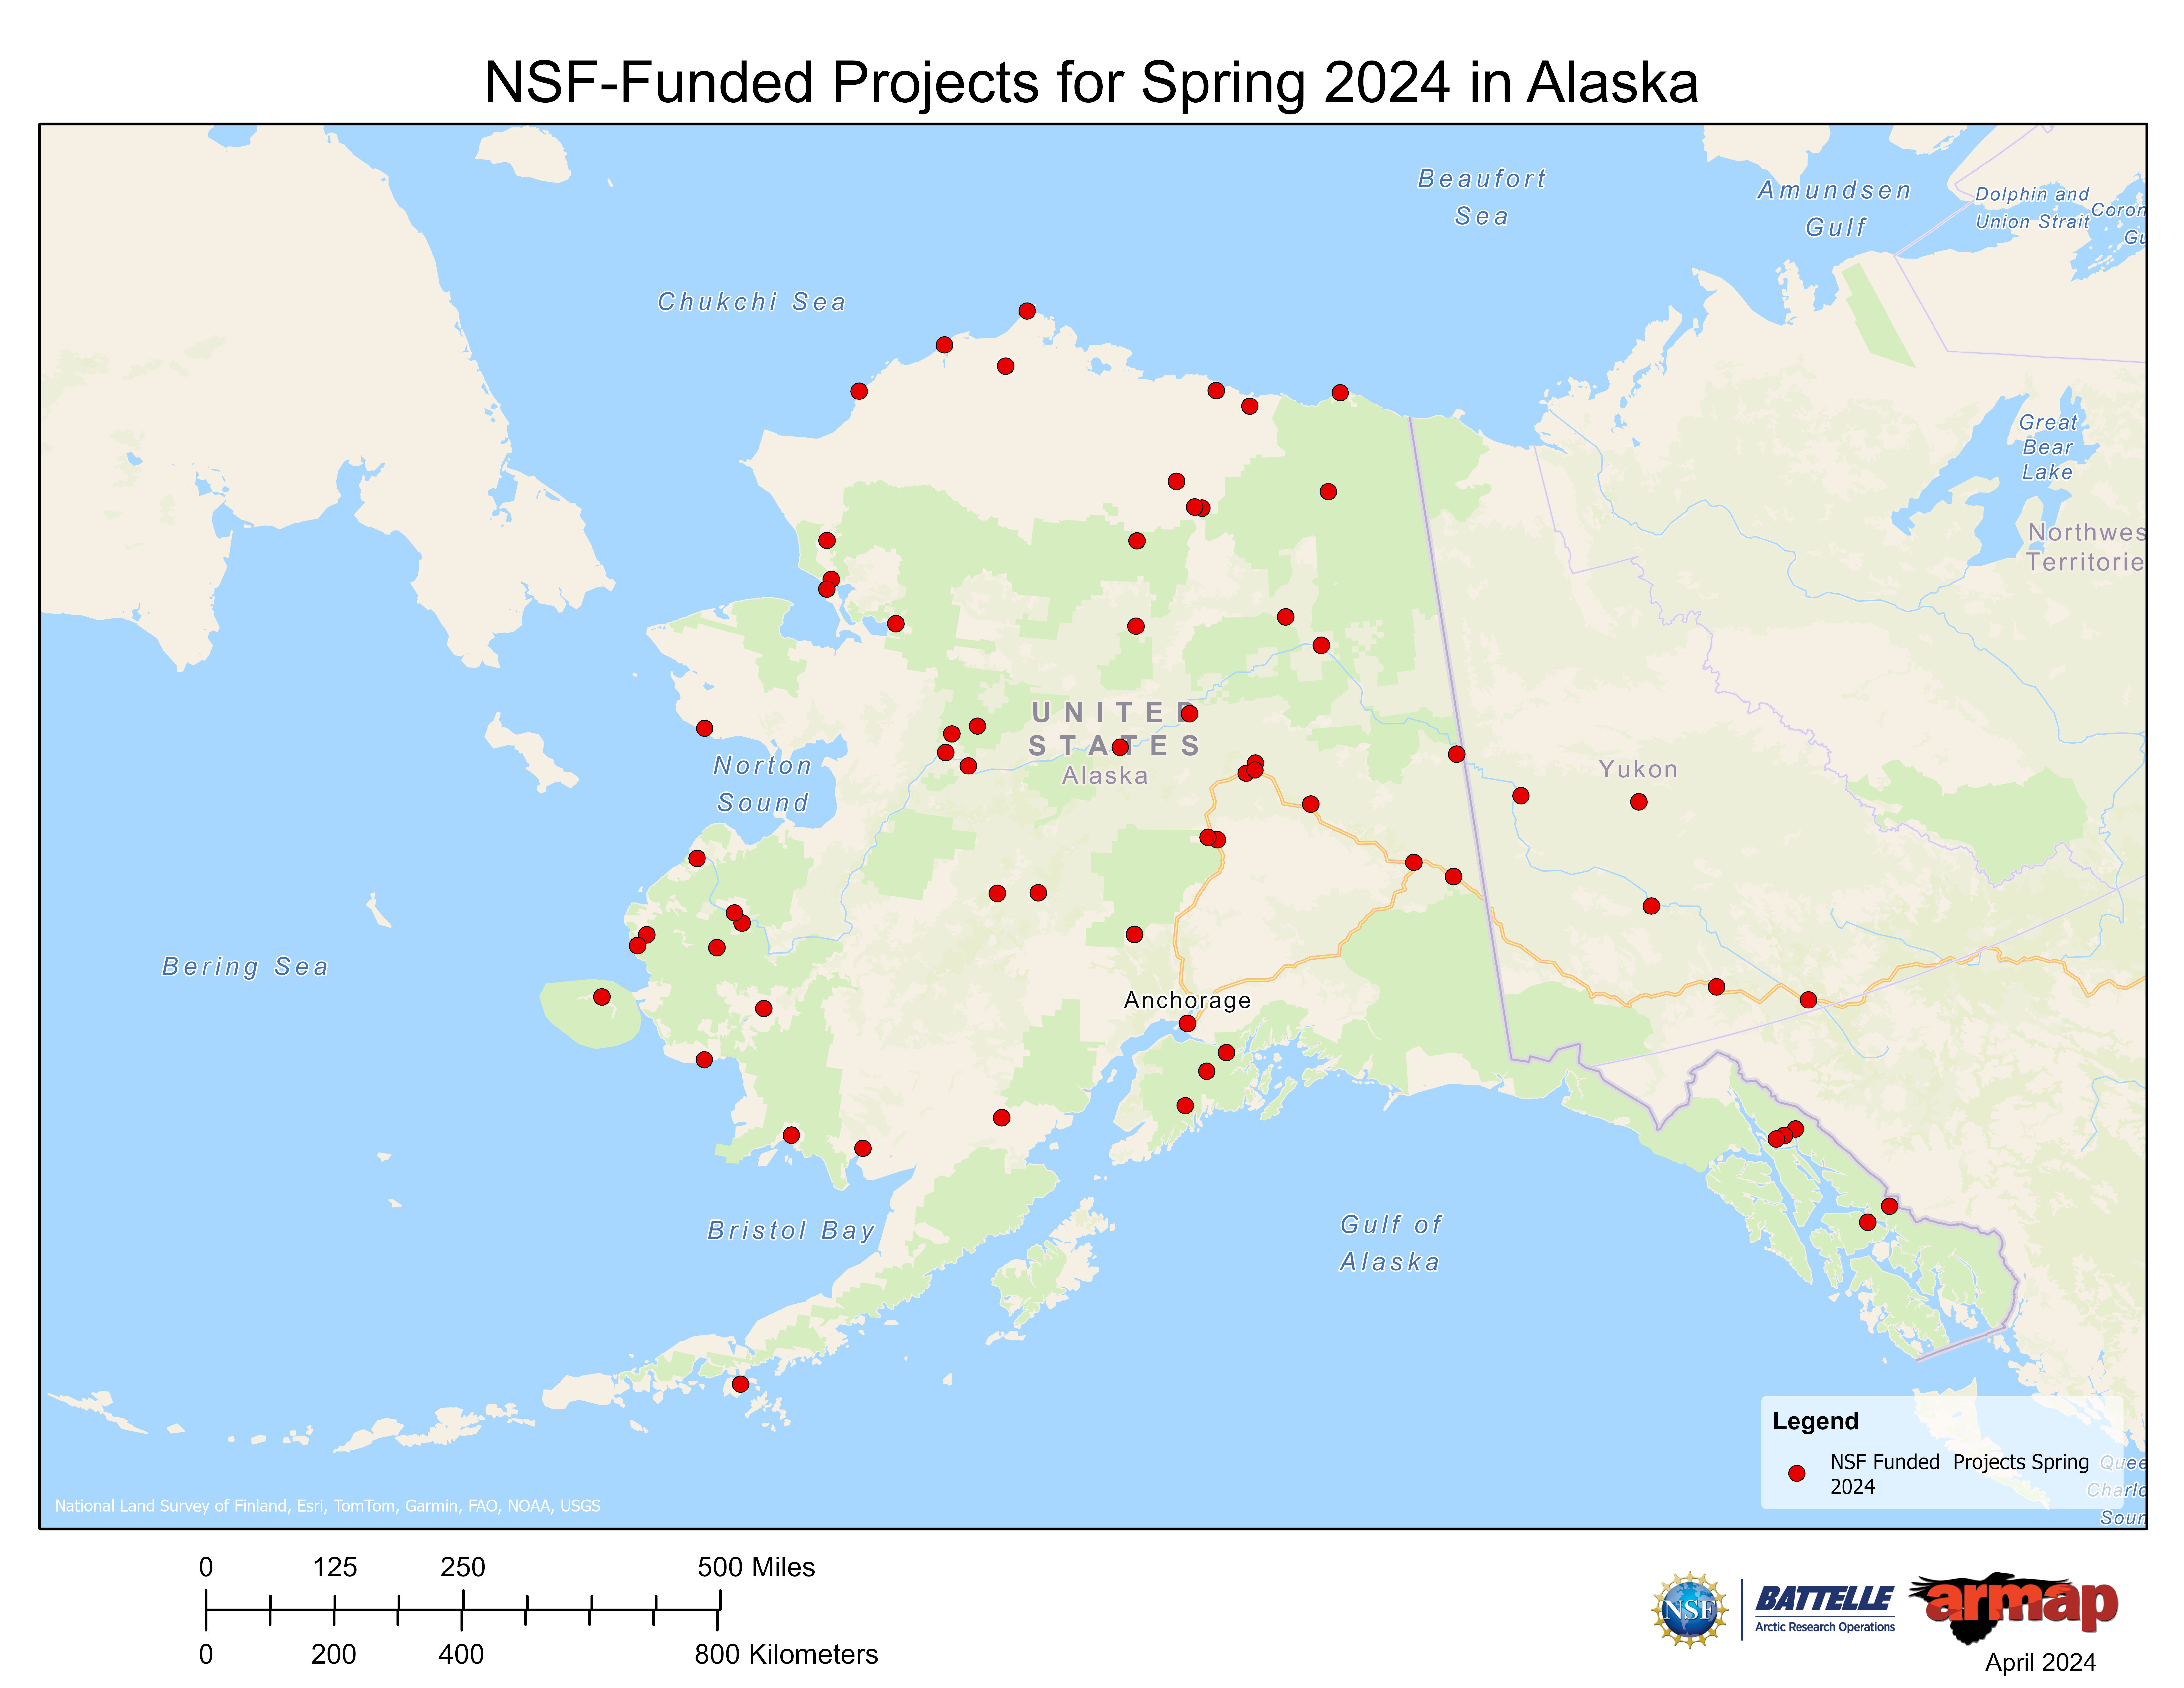 NSF-Funded Projects for Alaska, Spring of this Year